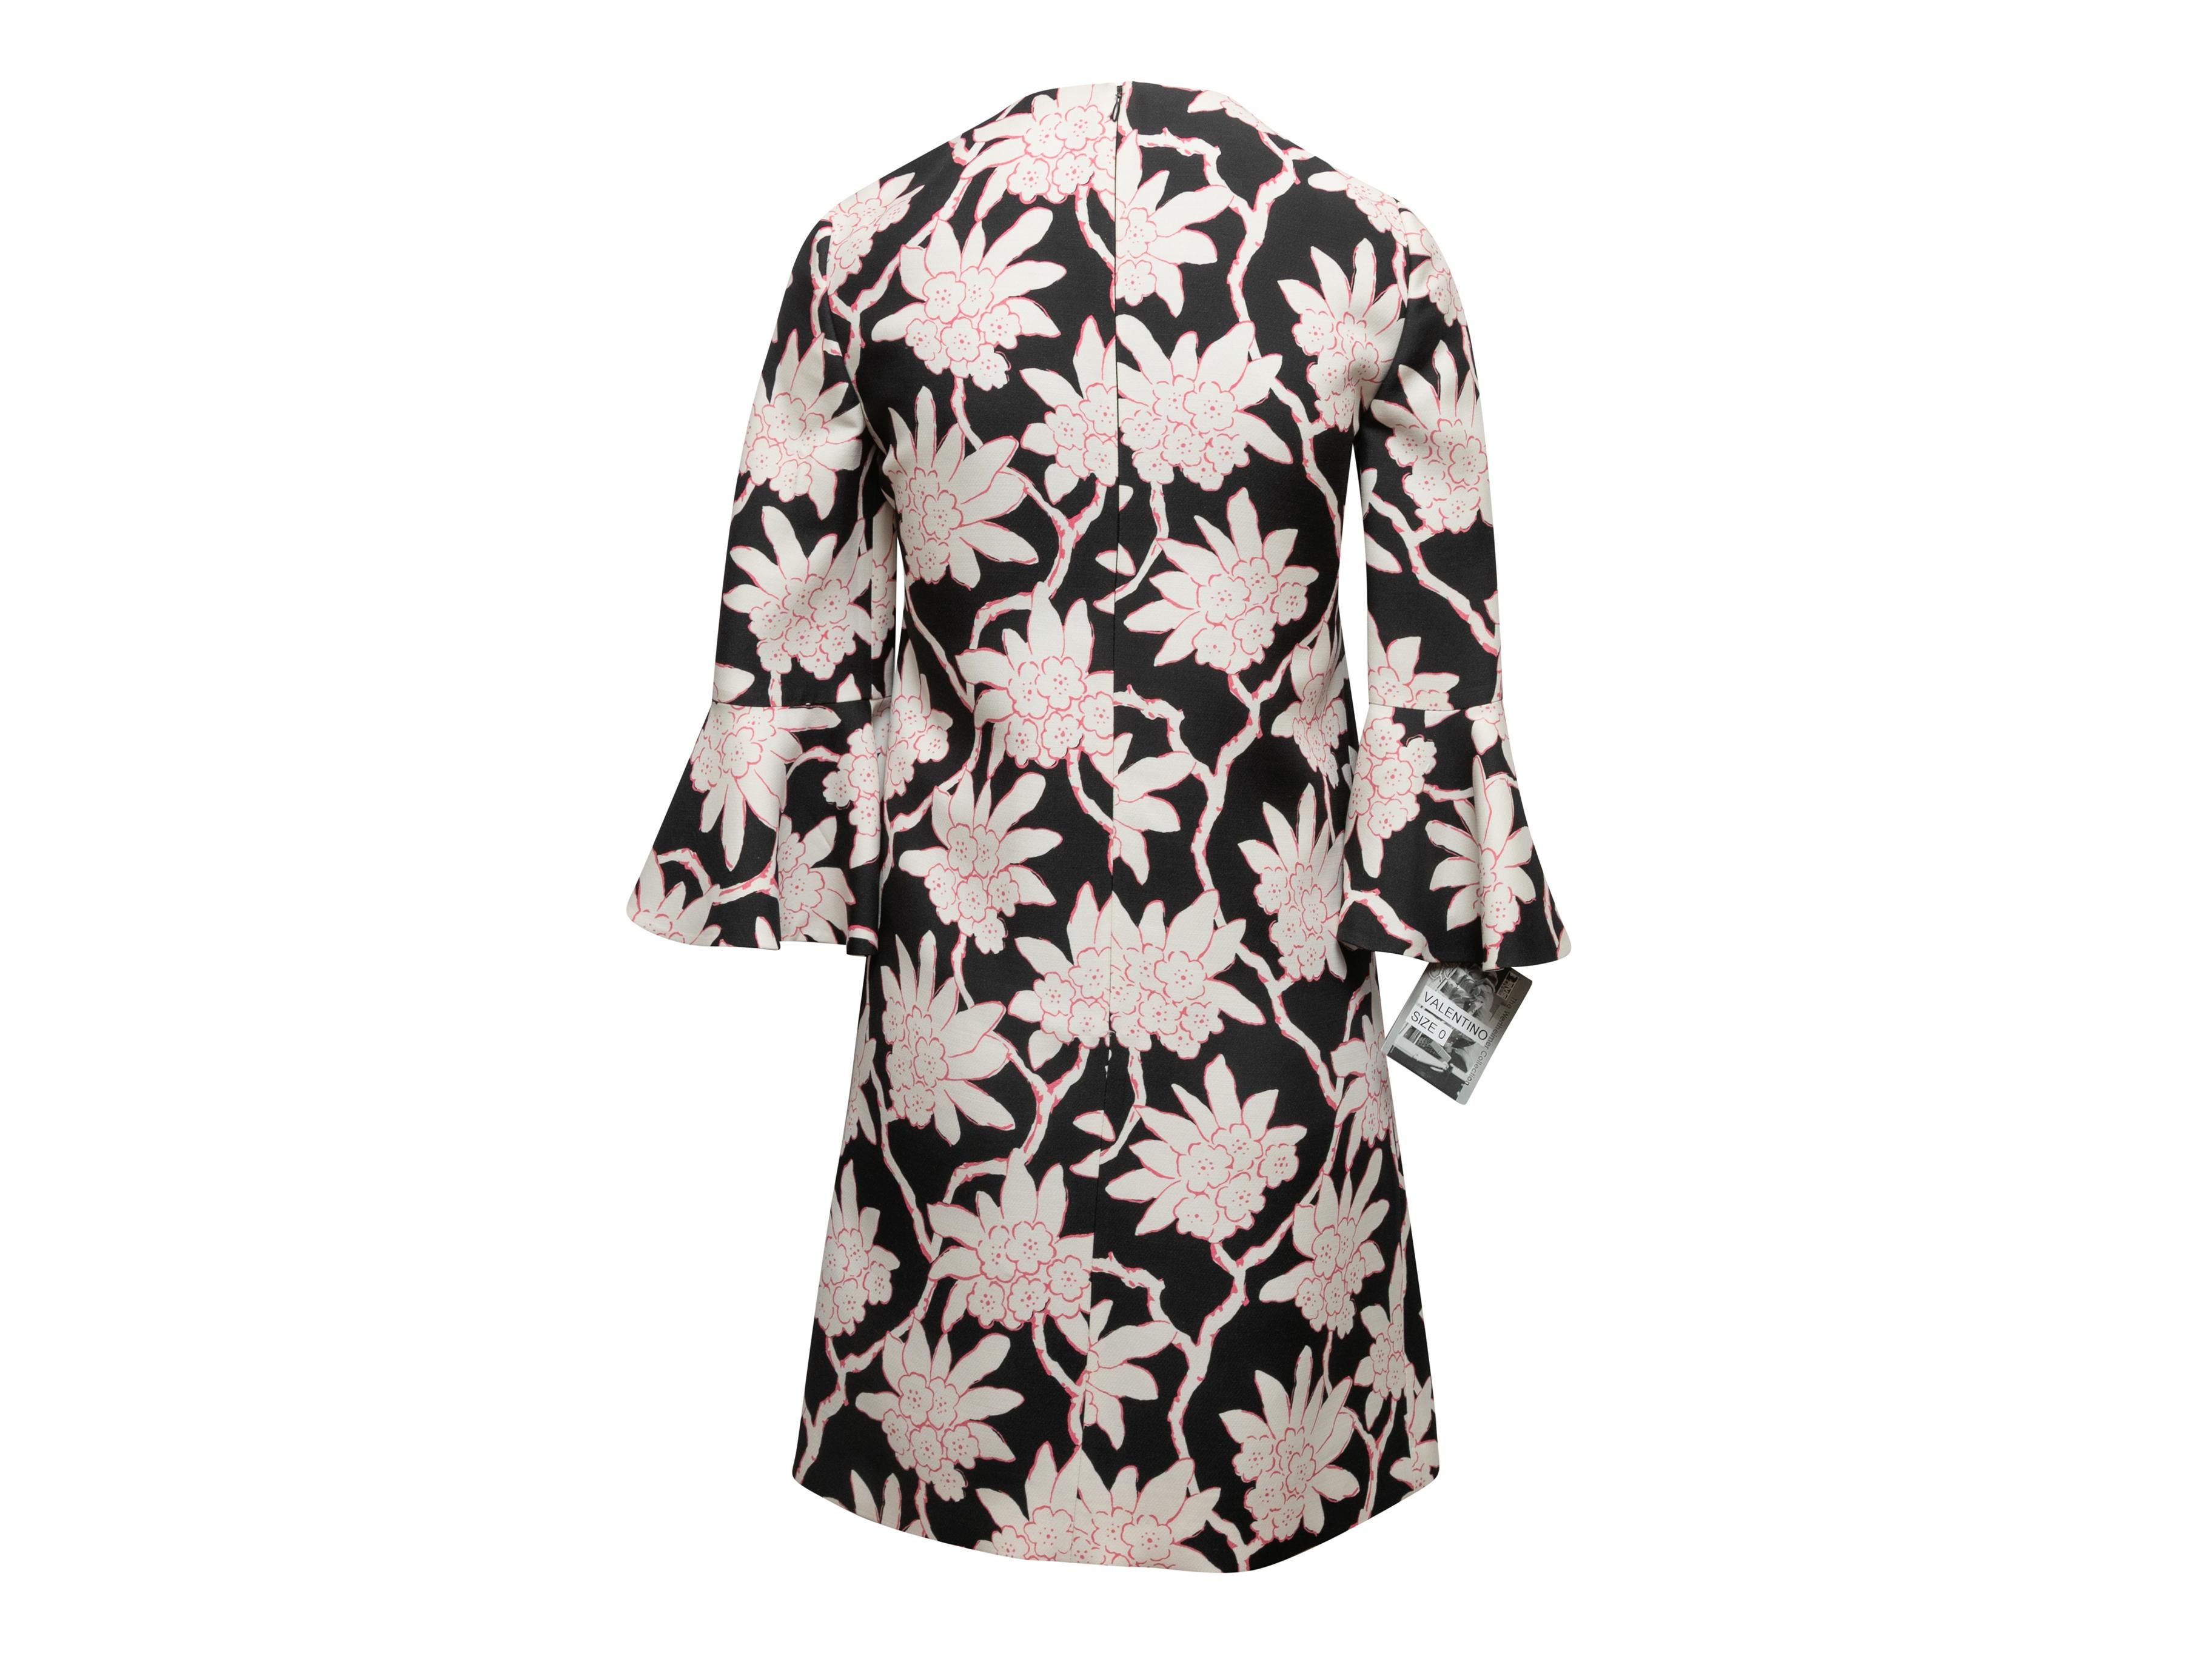 Black, white, and pink wool and silk-blend floral print mini dress by Valentino. Crew neck. Three-quarter sleeves. Zip closure at back. Designer size 00. 32